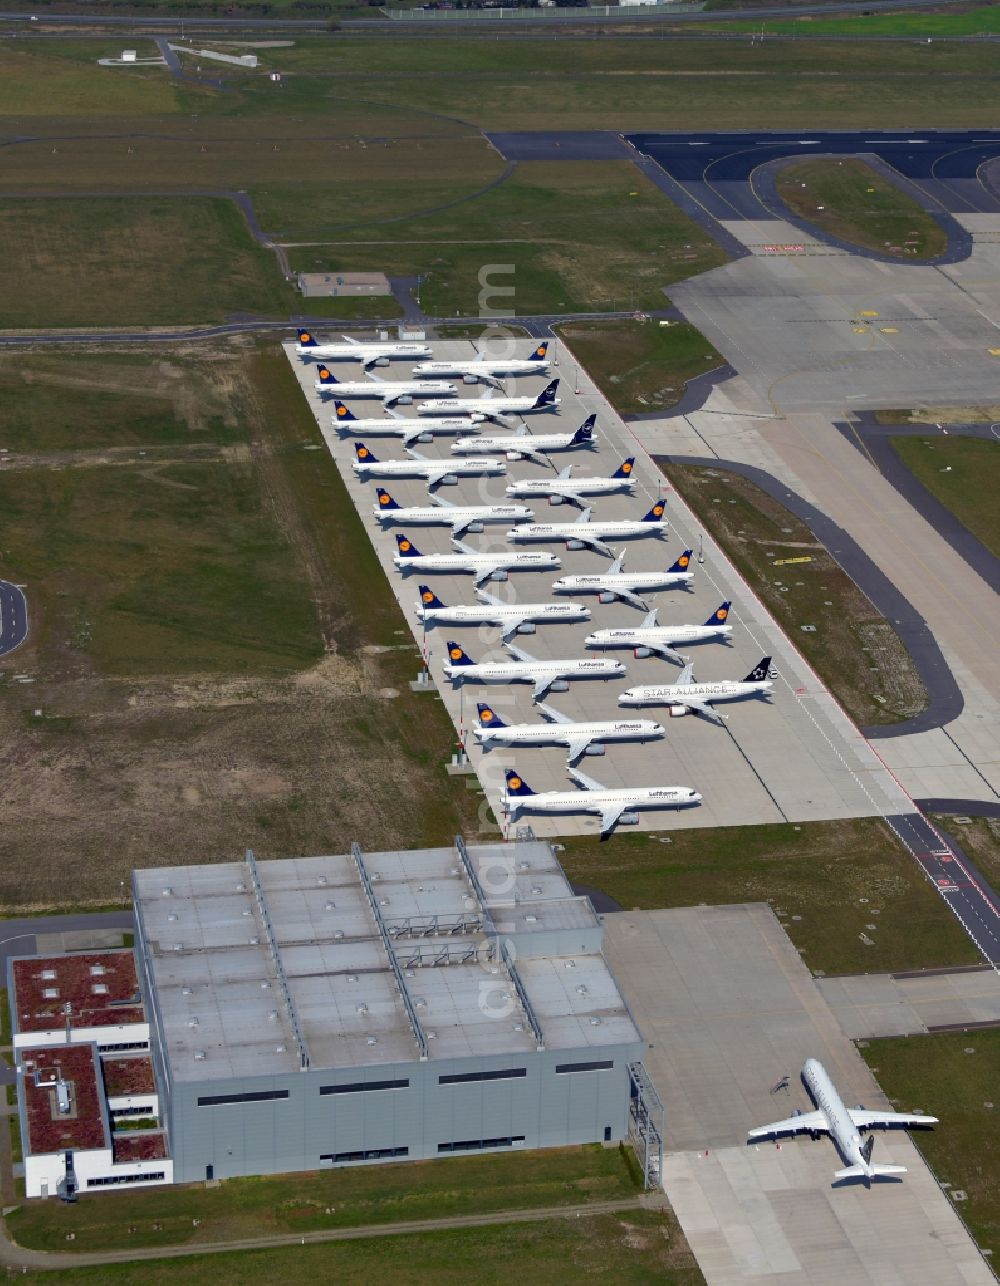 Schönefeld from the bird's eye view: Decommissioned due to crisis passenger airplanes of the airline Lufthansa in parking position - parking area at the airport in Schoenefeld in the state Brandenburg, Germany